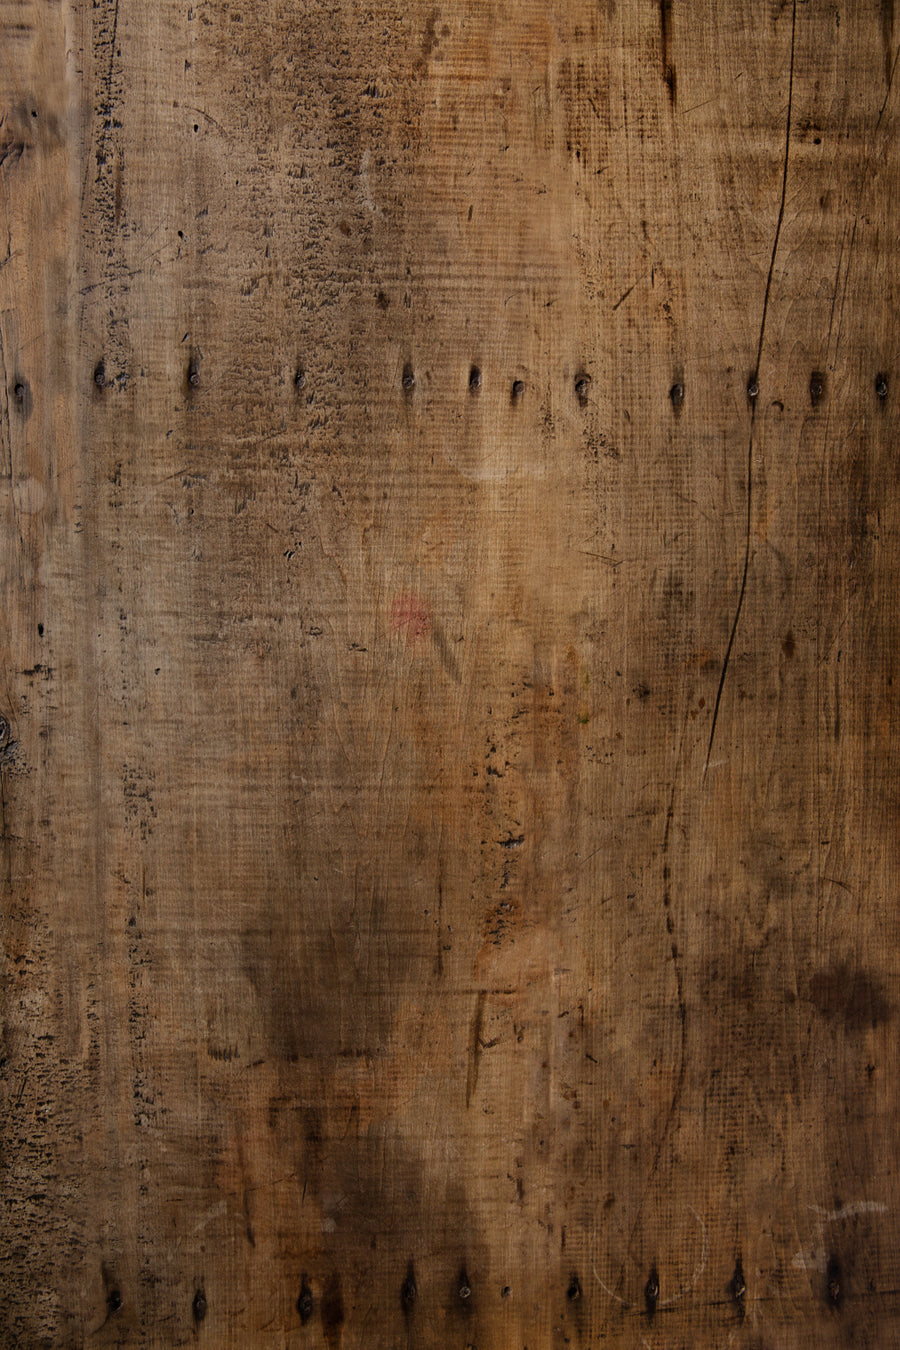 Rustic weathered wood photography surface